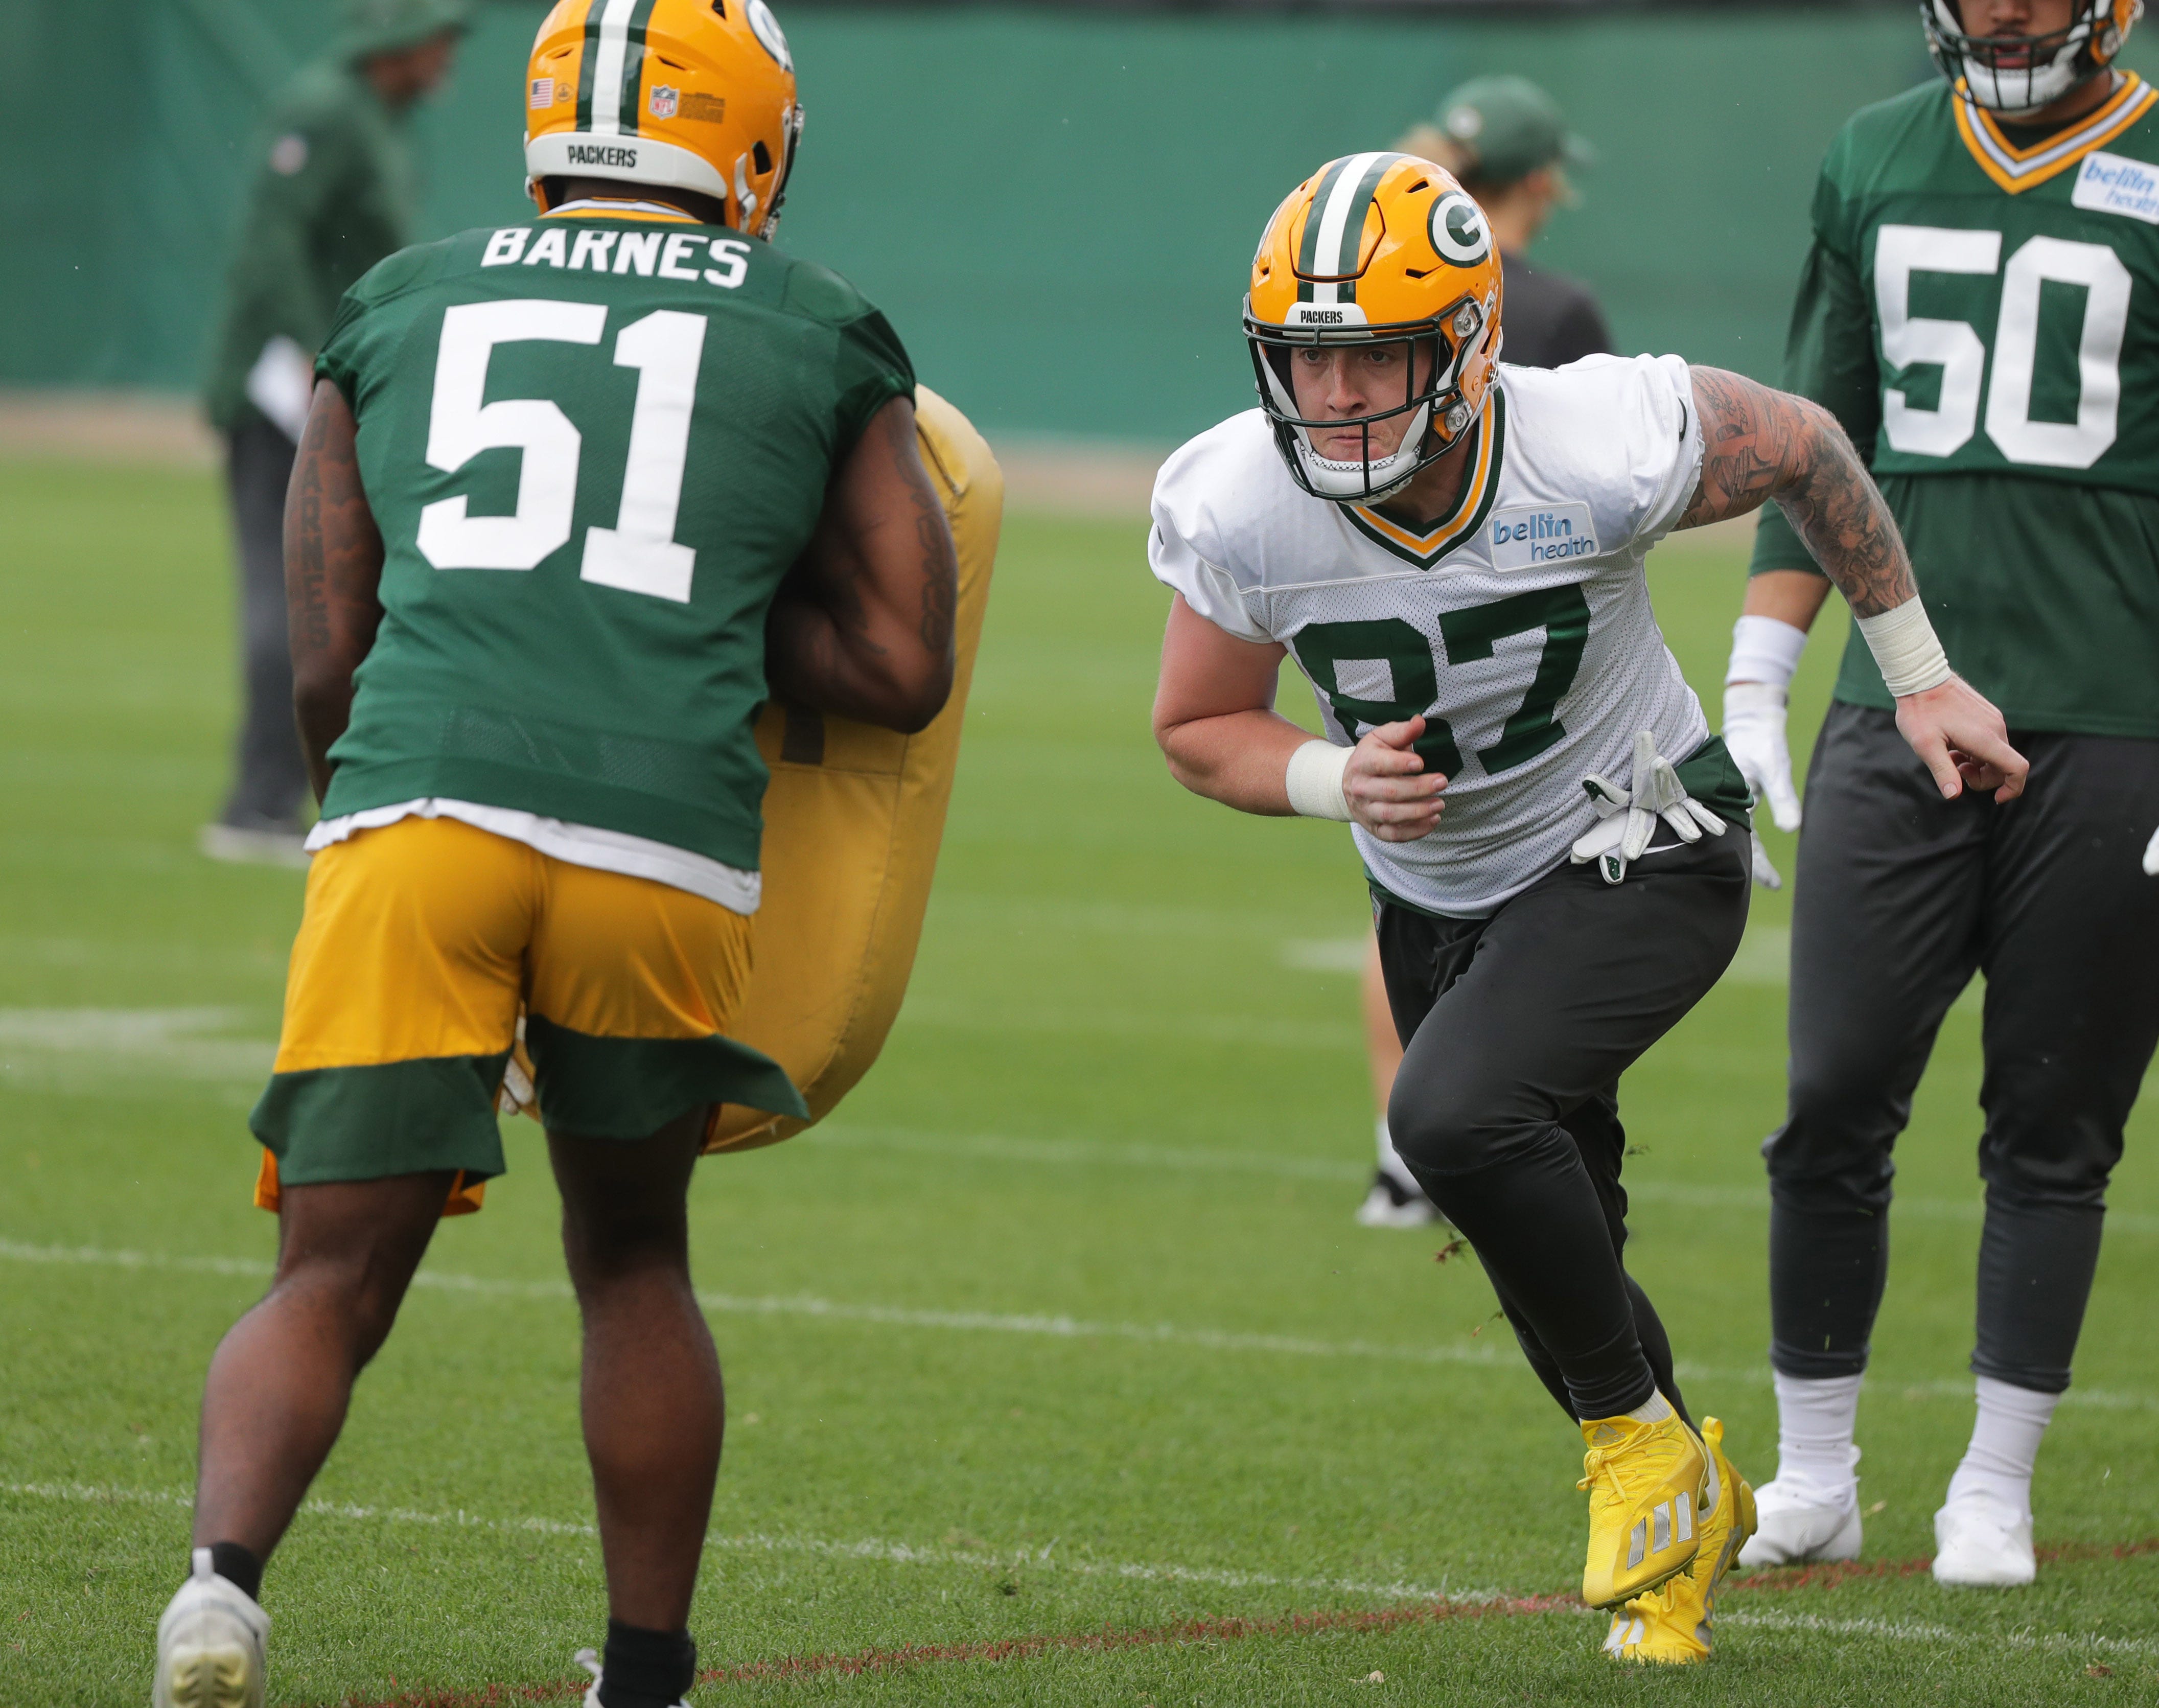 Packers tight end Jace Sternberger suspended 2 games for substance-abuse violation